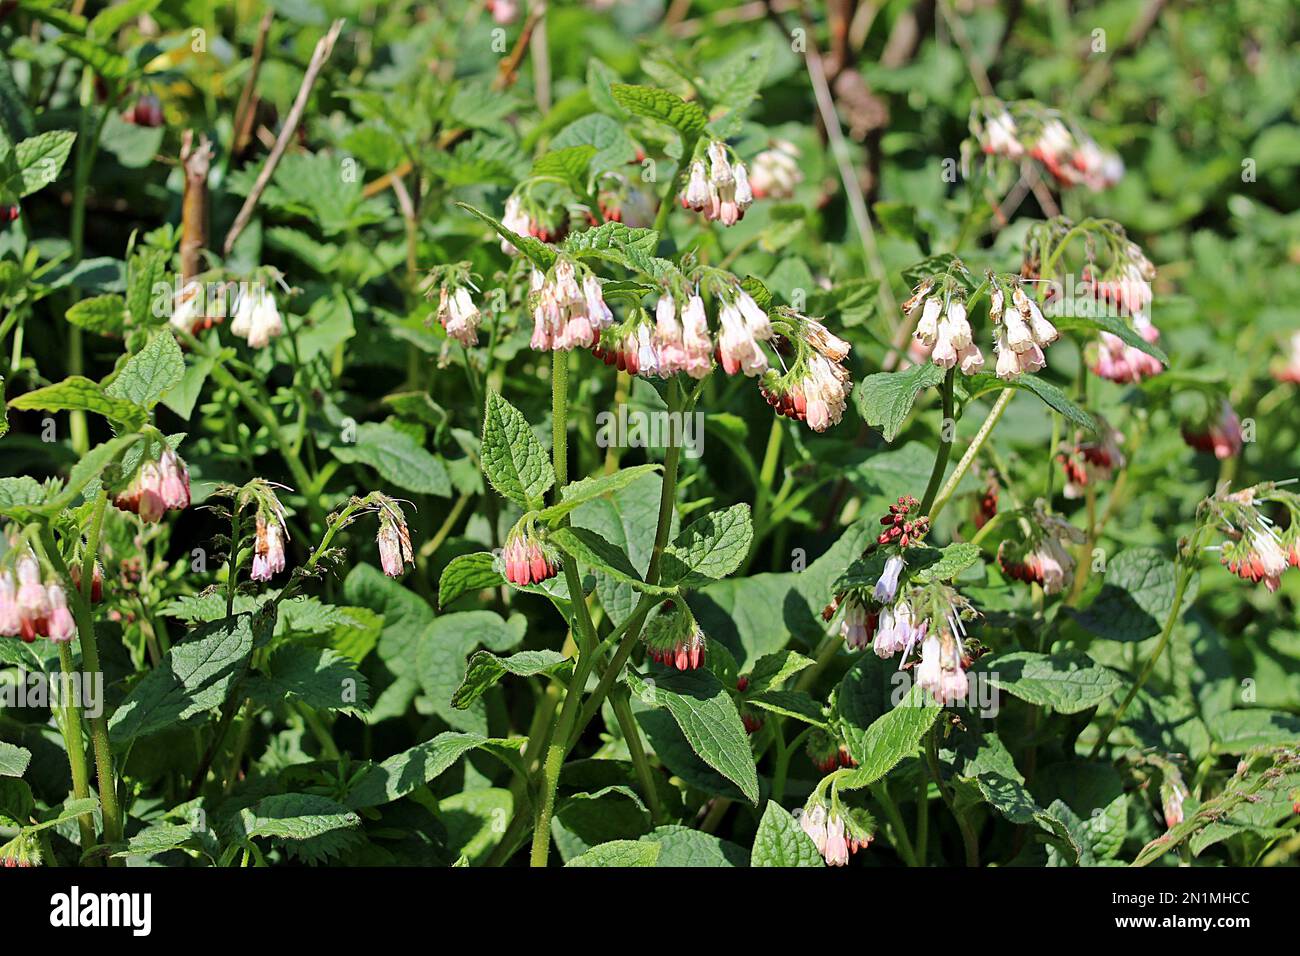 flowers and mature plants of Himalayan balsam (Impatiens glandulifera) an invasive species in the UK Stock Photo